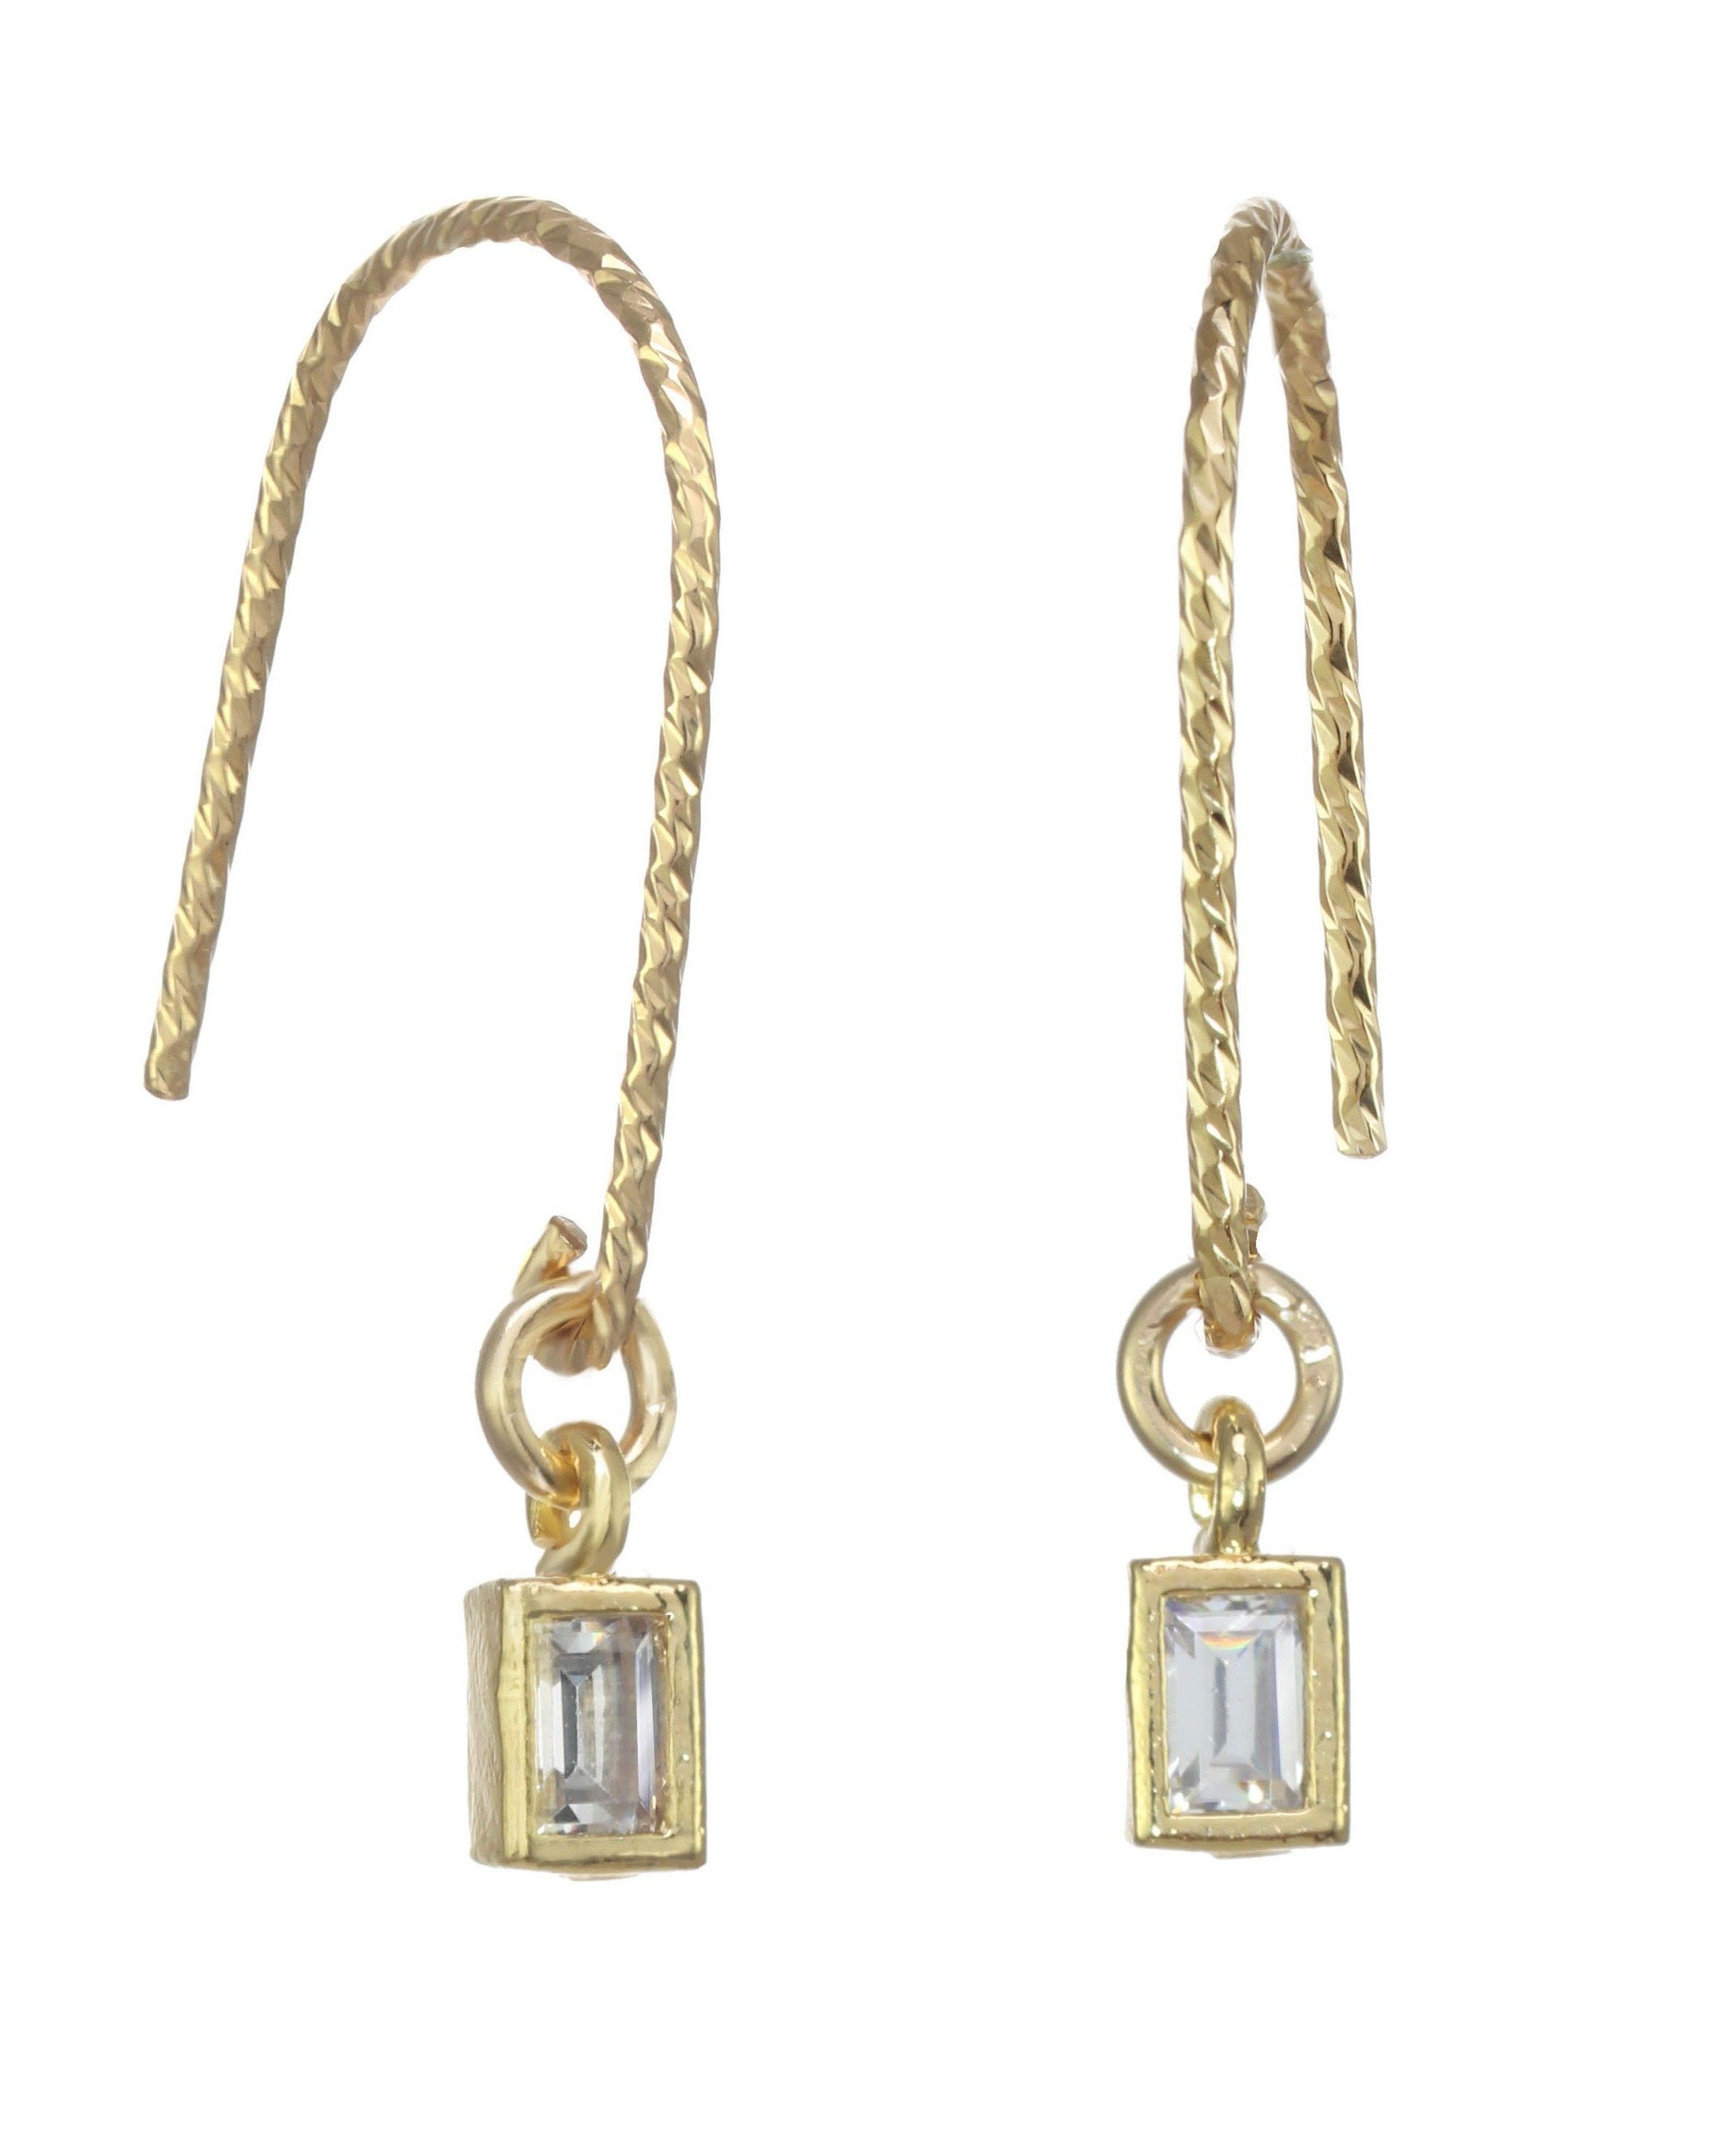 You Cadre Earrings by KOZAKH. Diamond textured hook earrings, crafted in 14K Gold Filled, featuring a CUbic Zirconia charm.